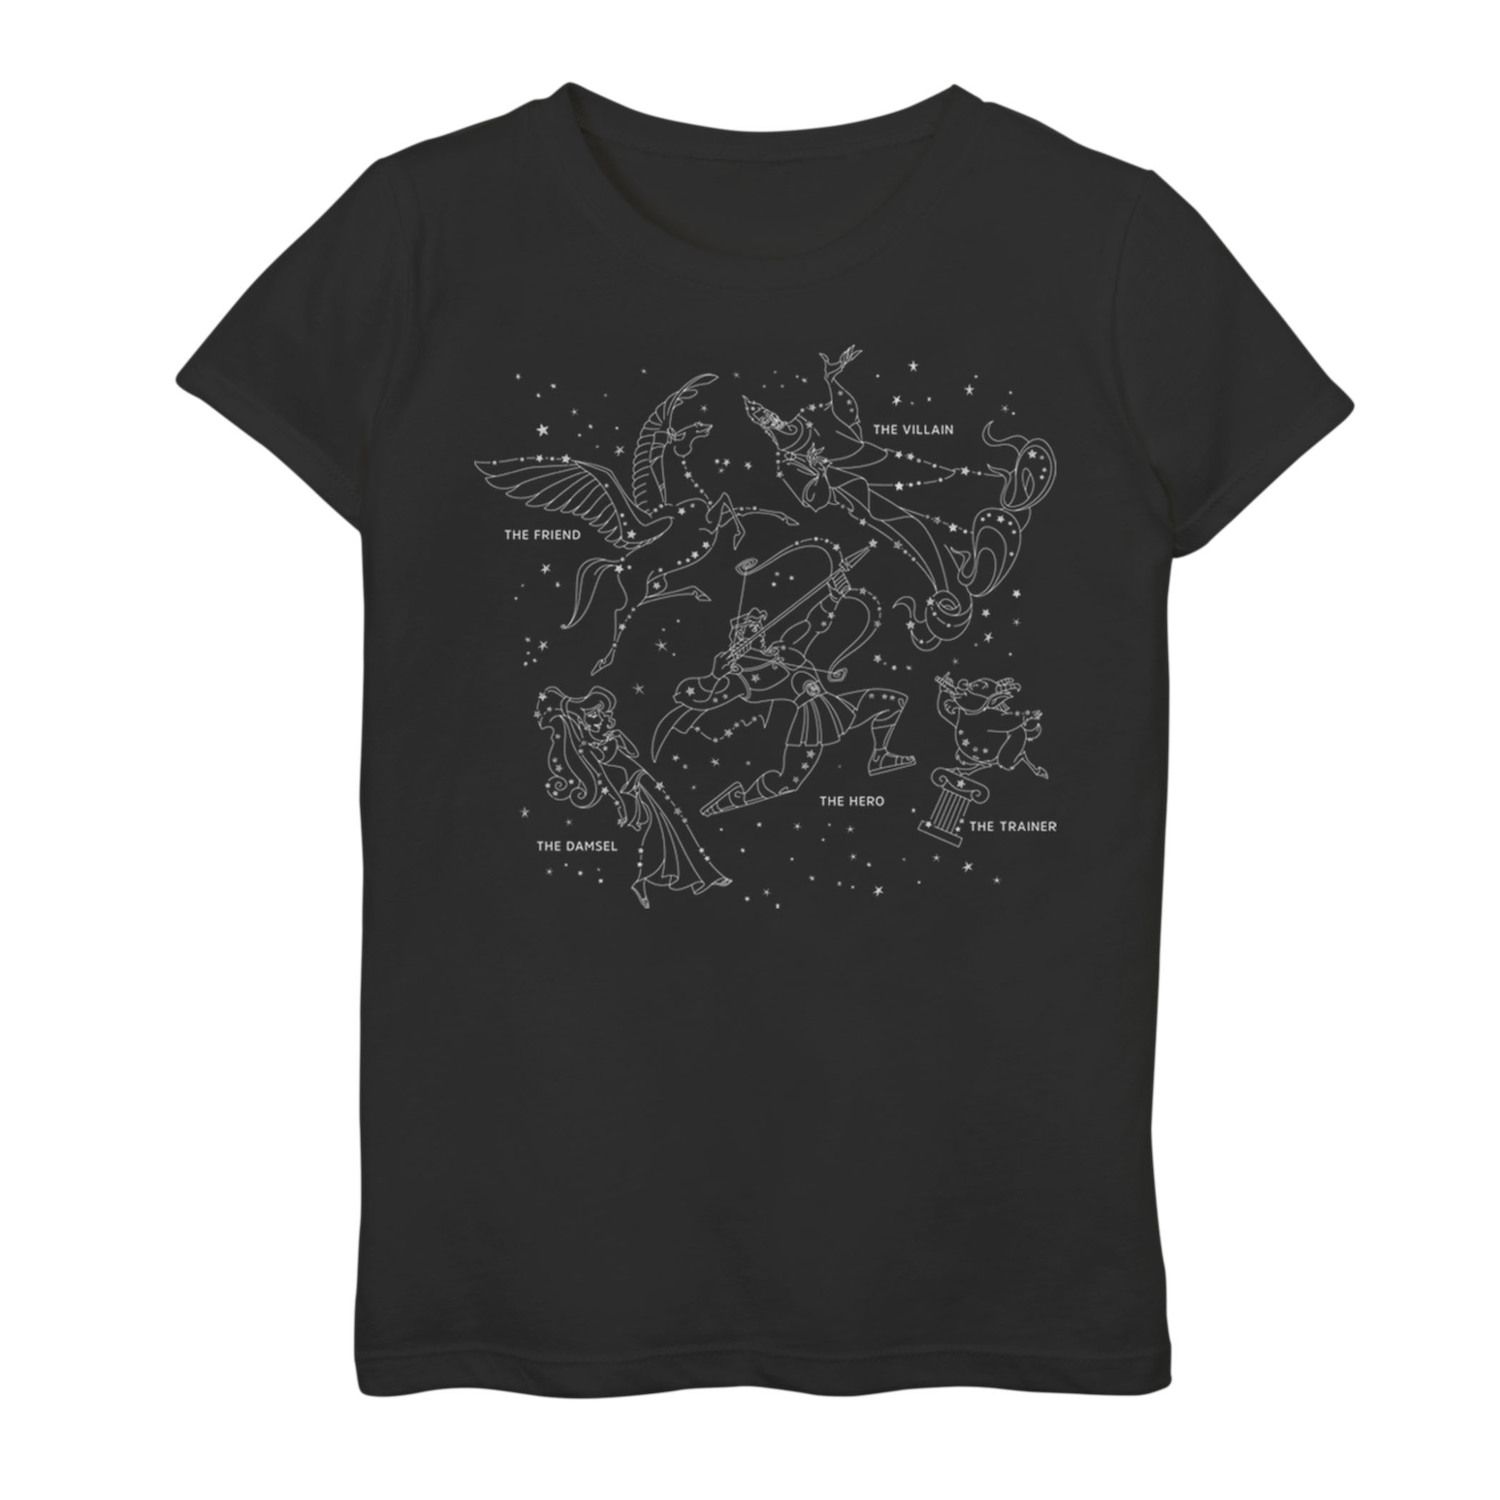 Image for Disney 's Hercules Girls 7-16 Constellation Poster Graphic Tee at Kohl's.